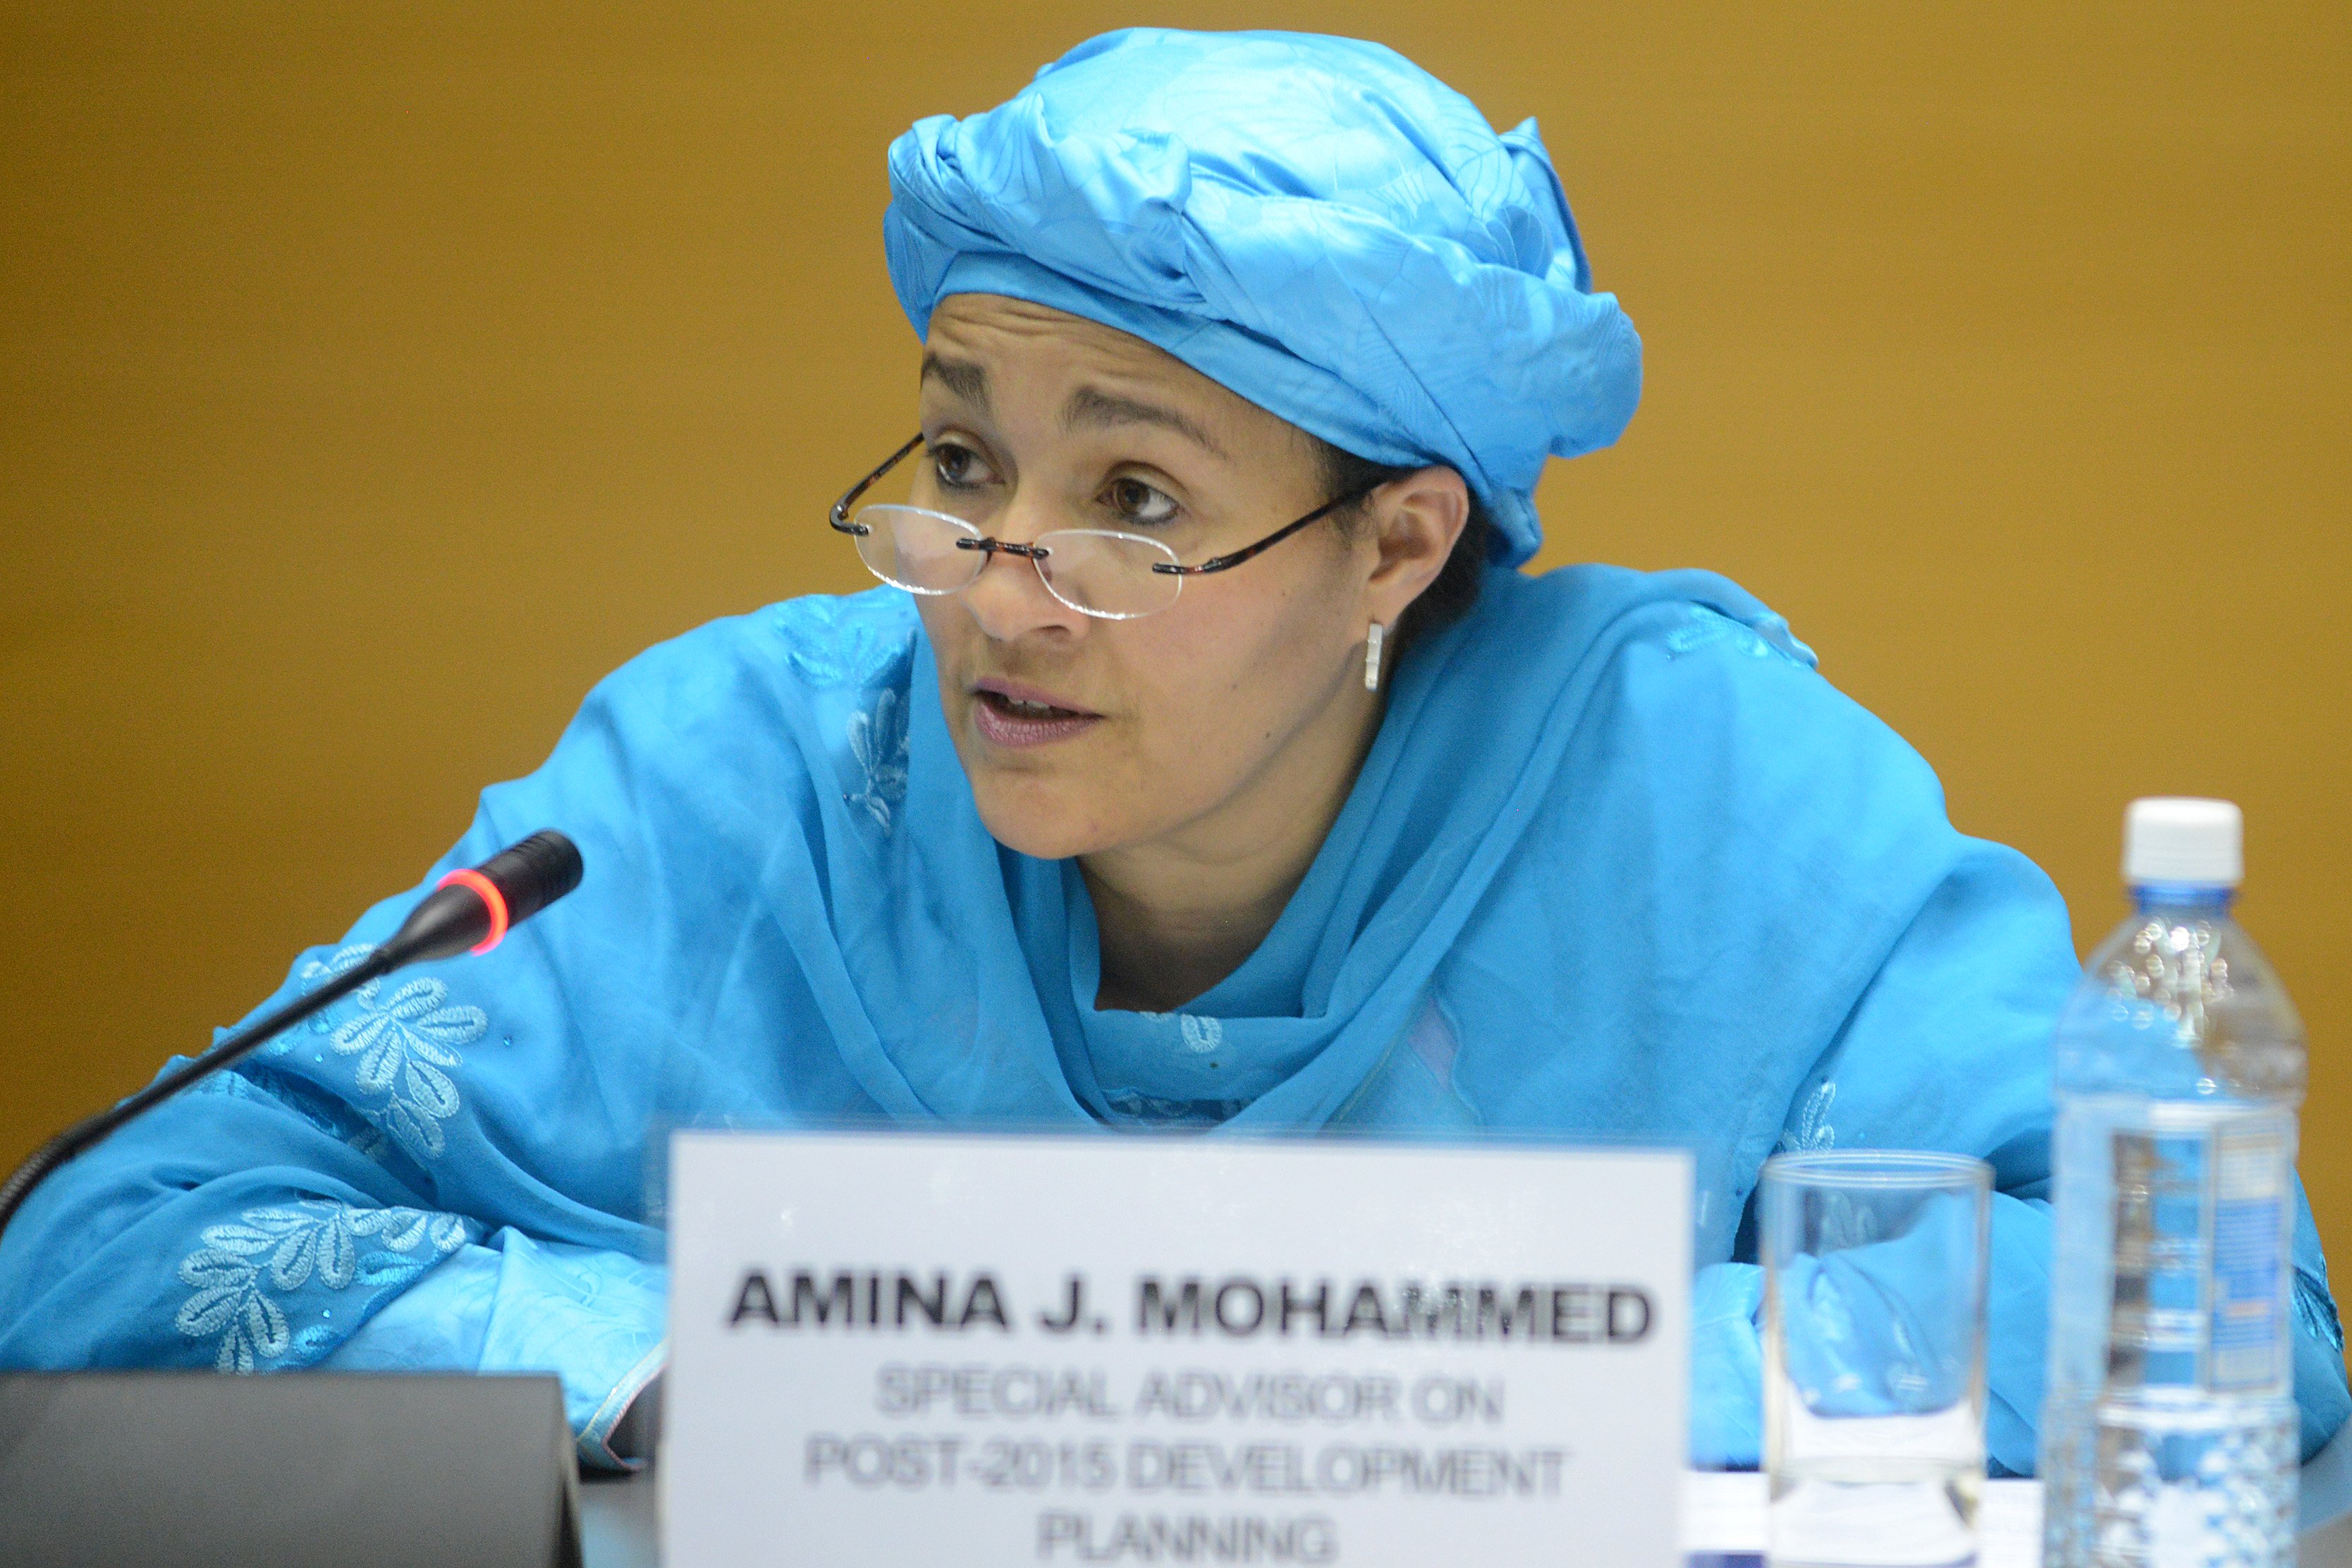 37 Job Openings for Young Nigerians in UN: Amina Mohammed